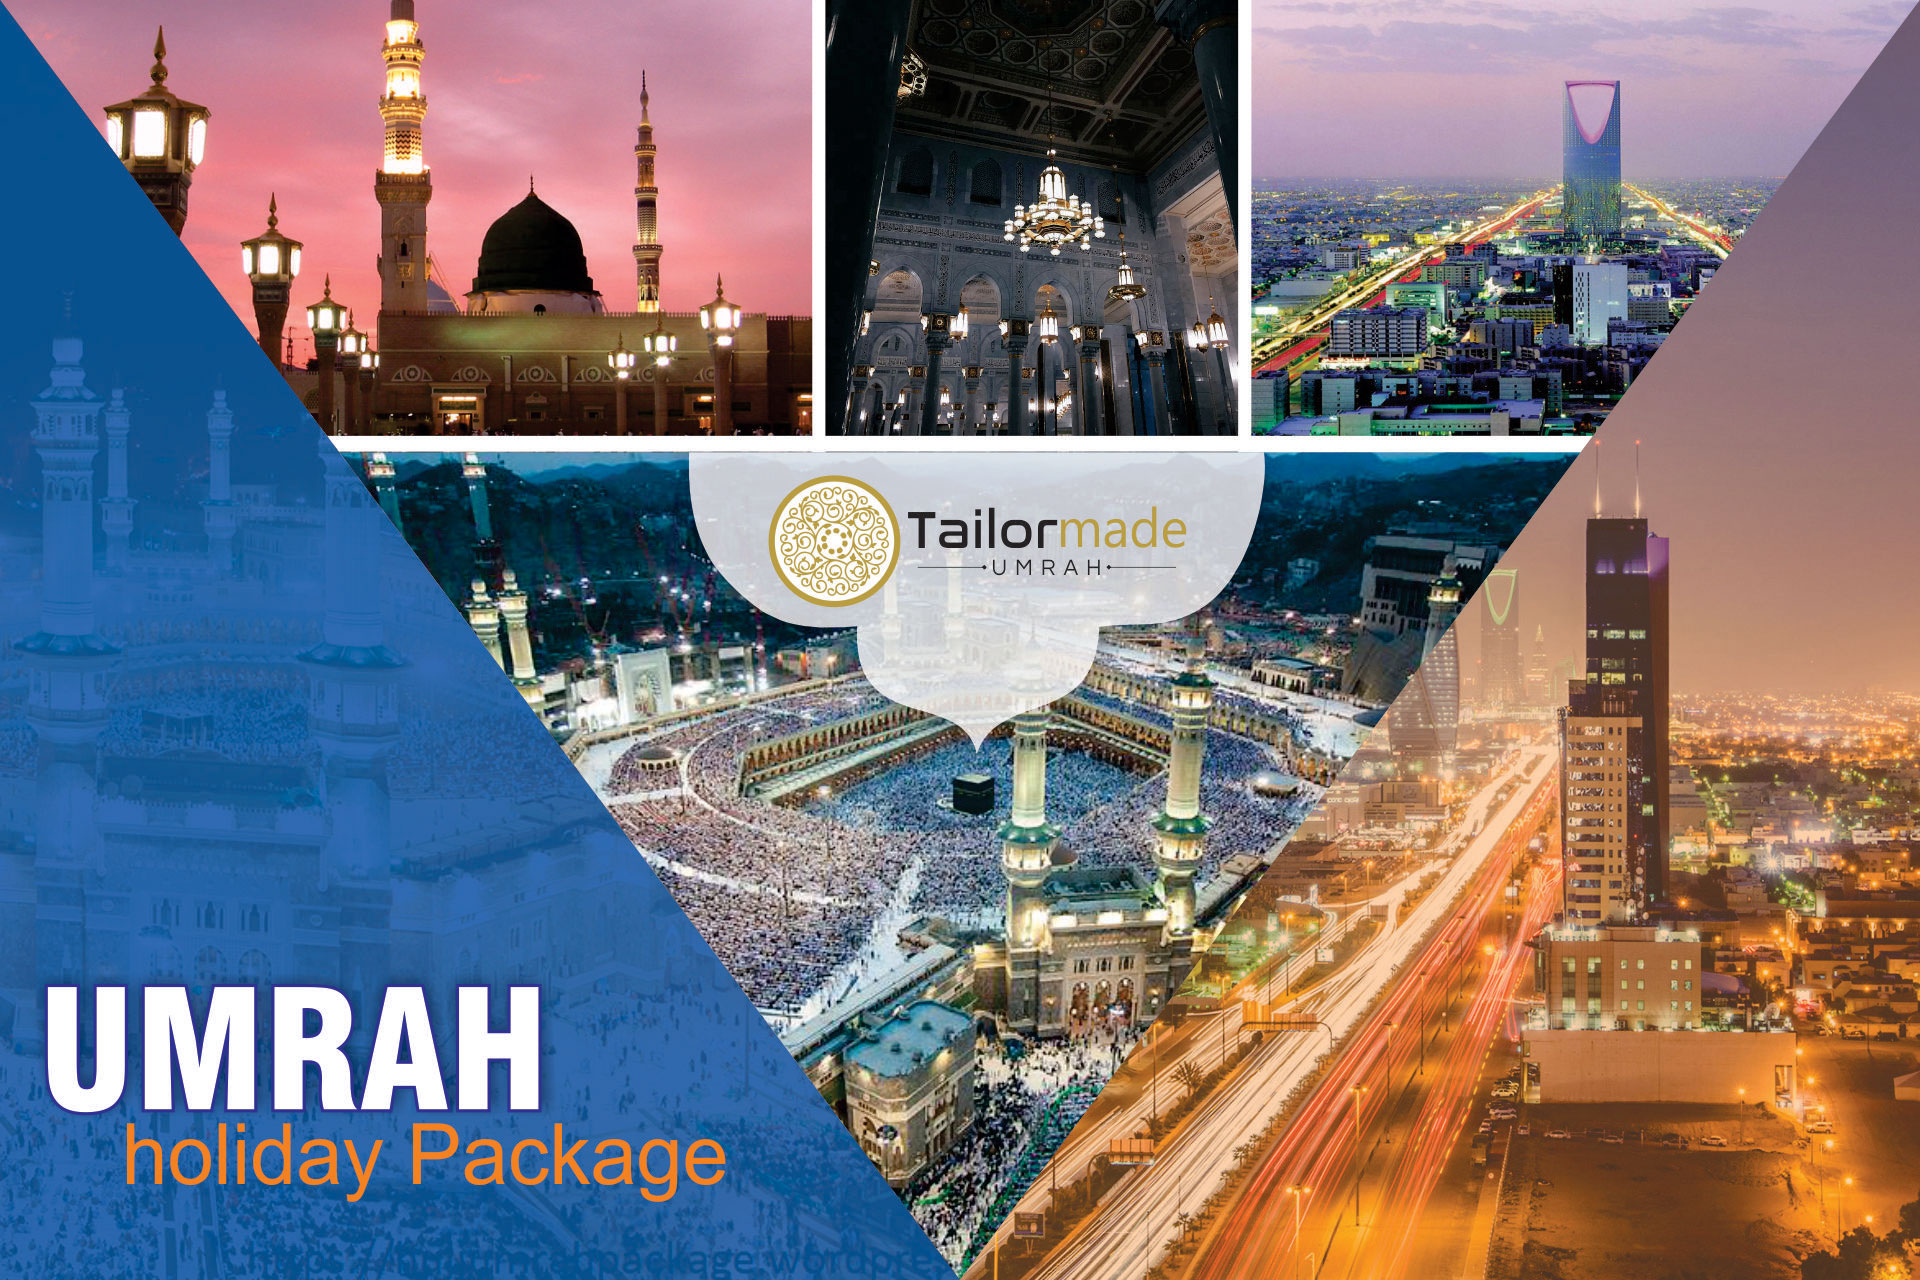 Cheap hajj and umrah packages London 2017-2018Tour and TravelsTour PackagesCentral DelhiKarol Bagh